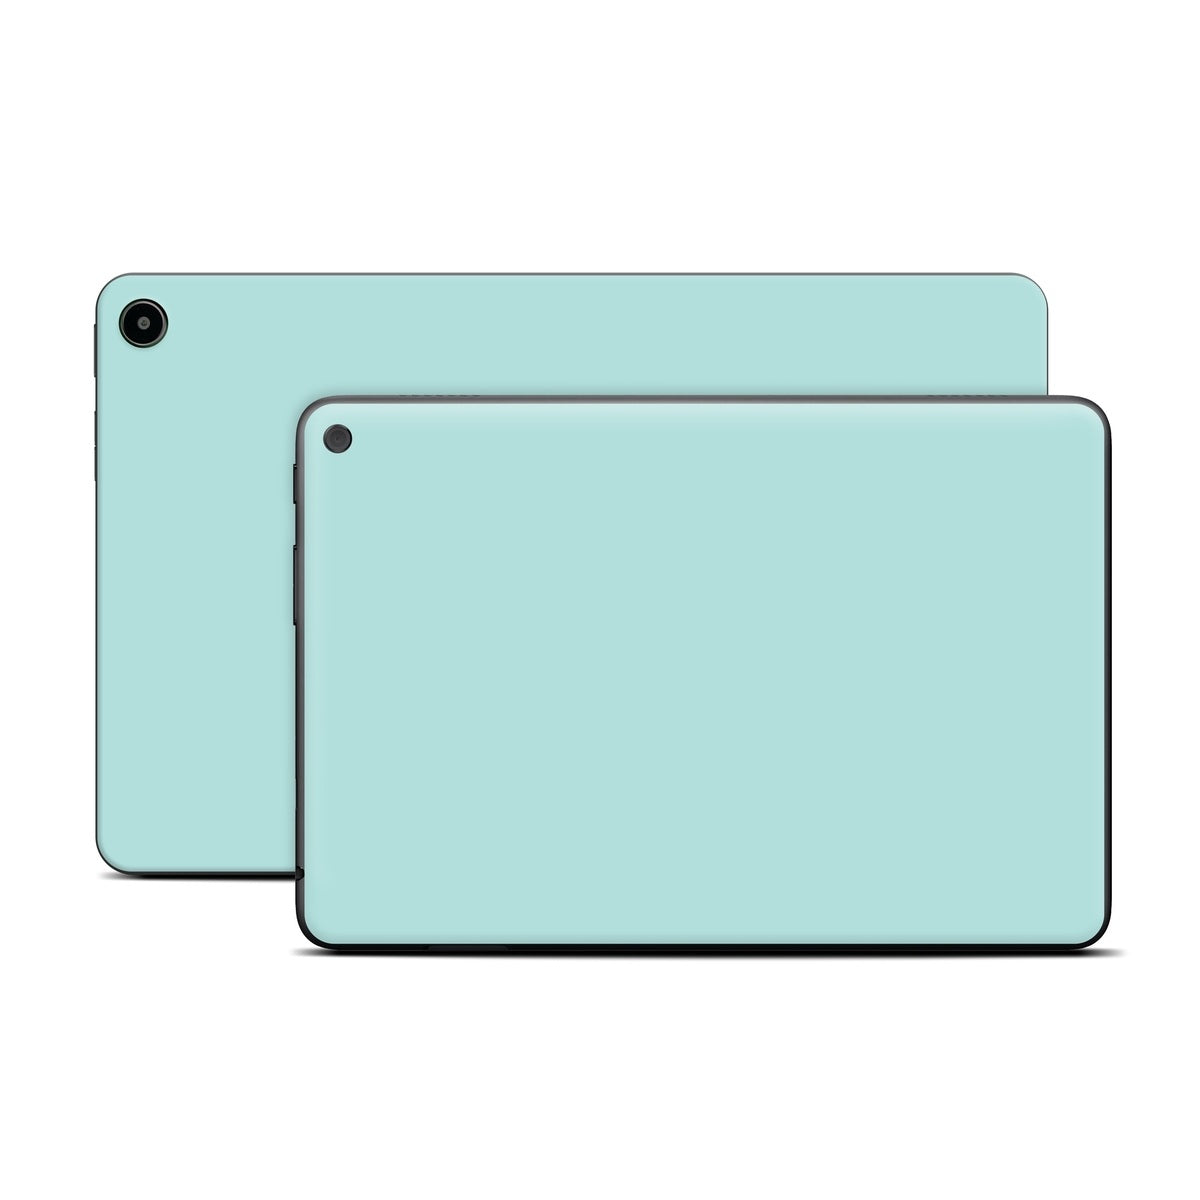 Solid State Mint - Amazon Fire Skin